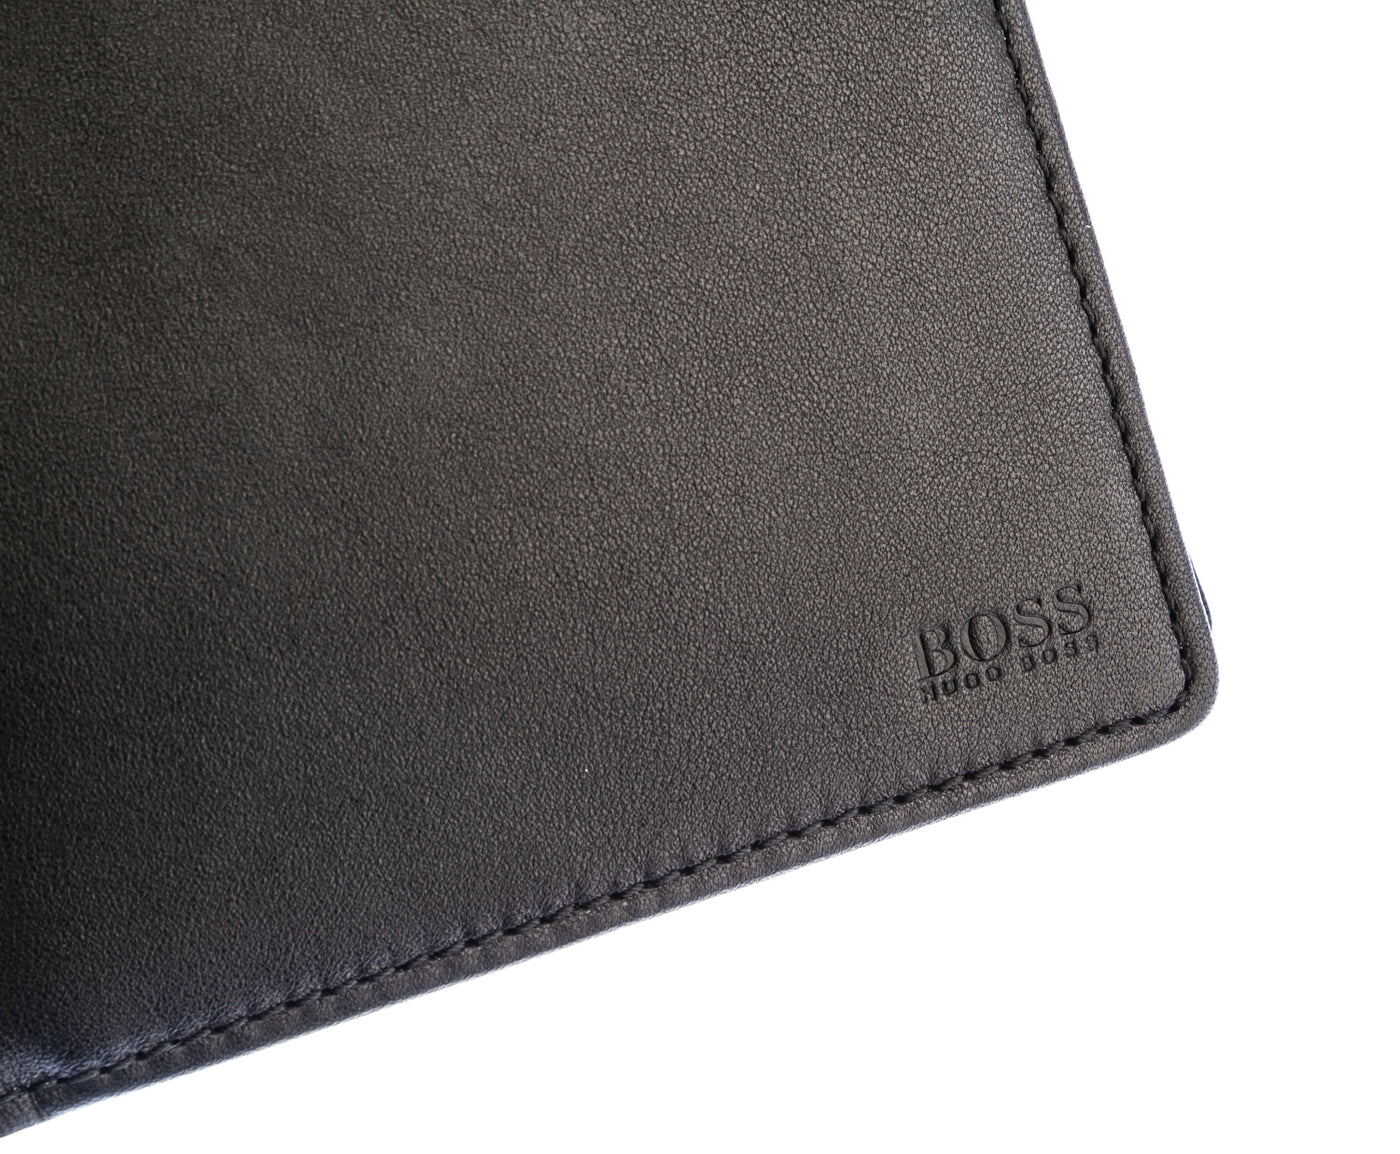 BOSS Majestic_S 4cc Coin Wallet in Black